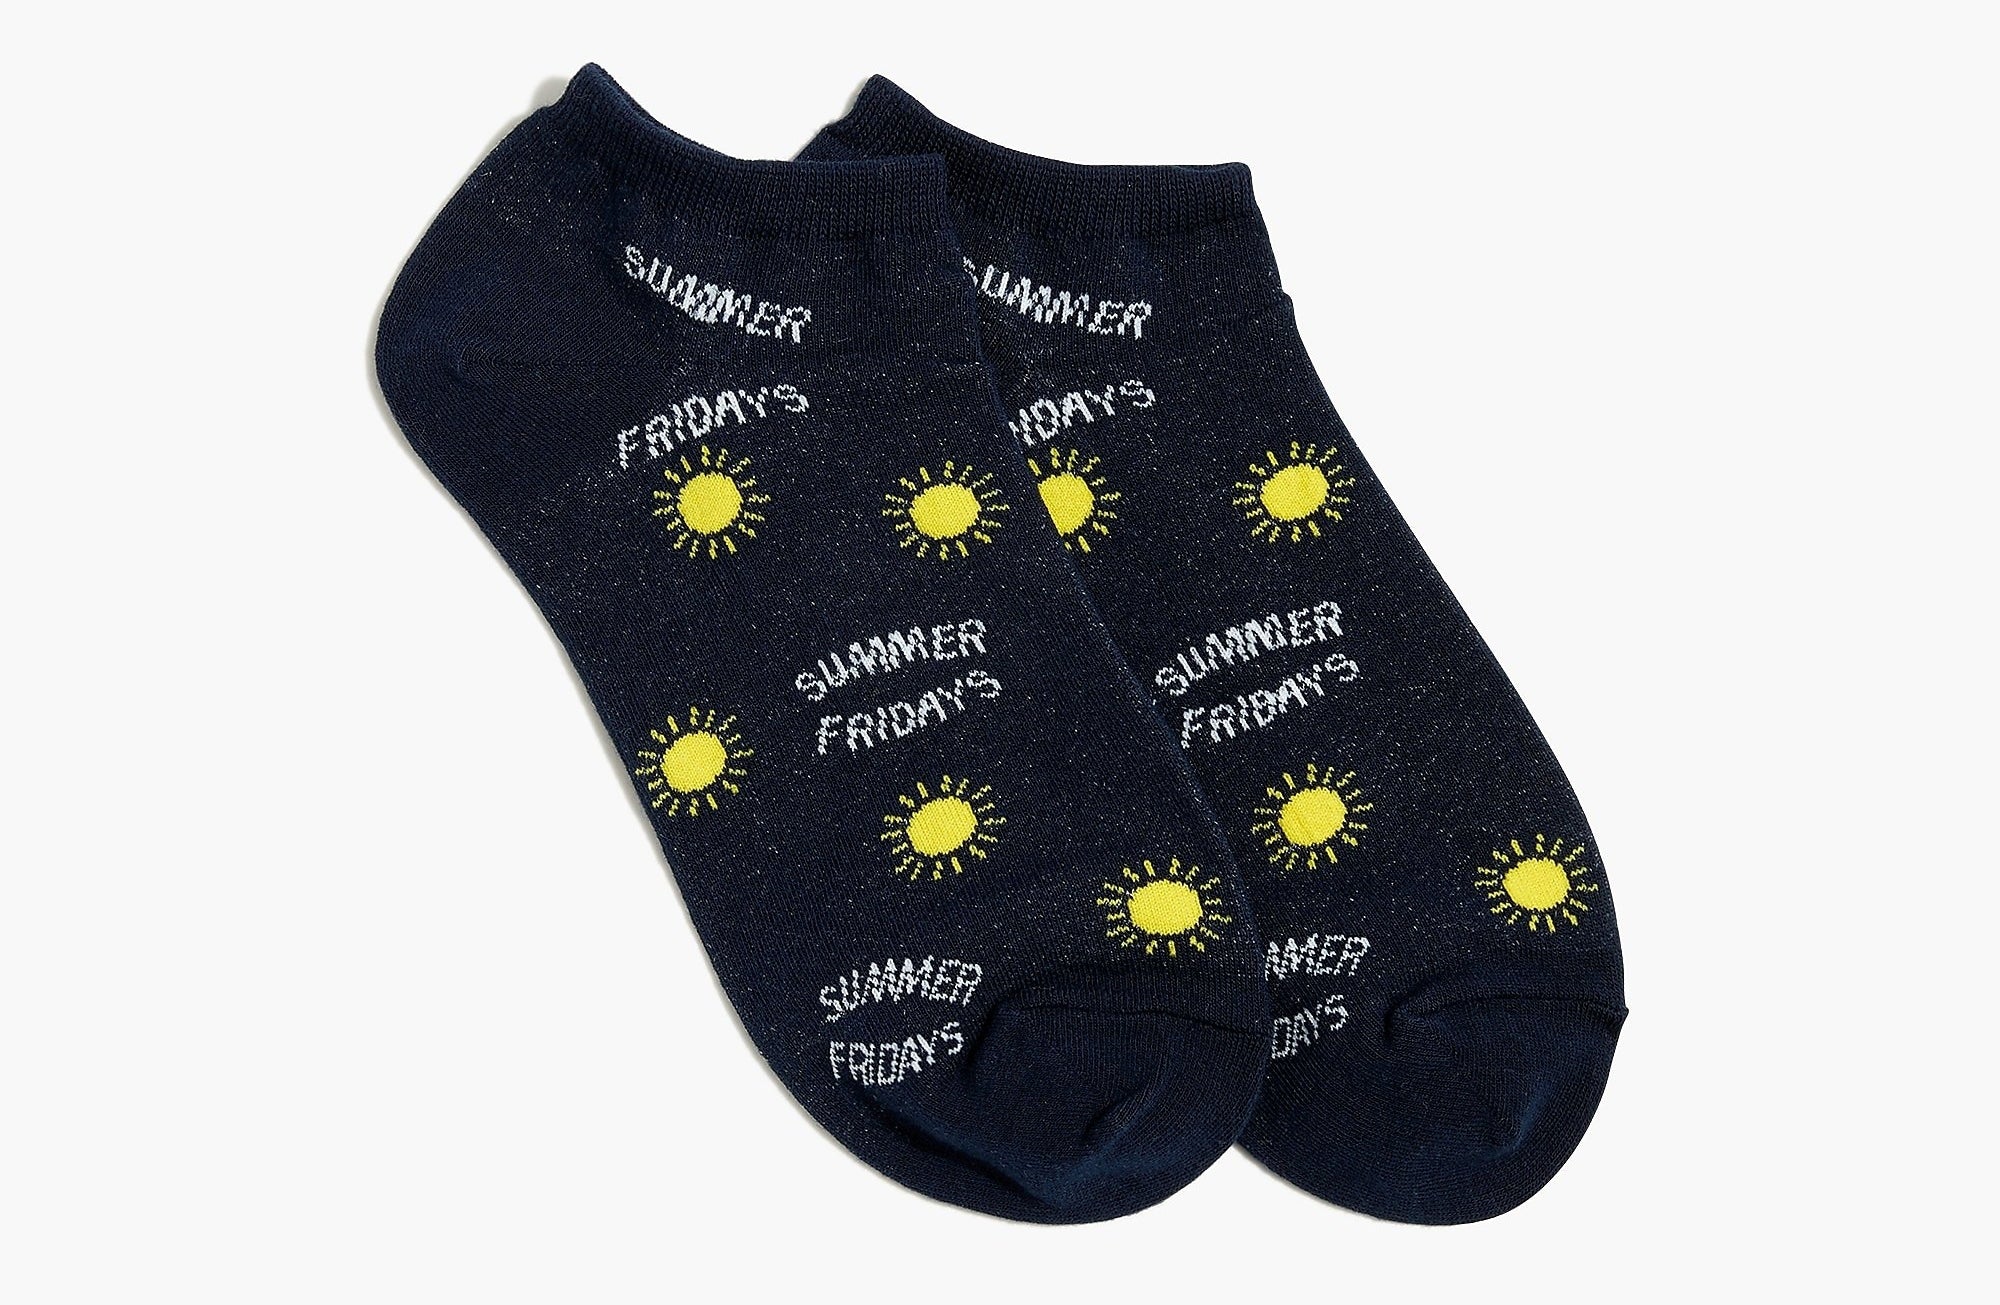 ankle socks that have &quot;summer fridays&quot; graphic on them